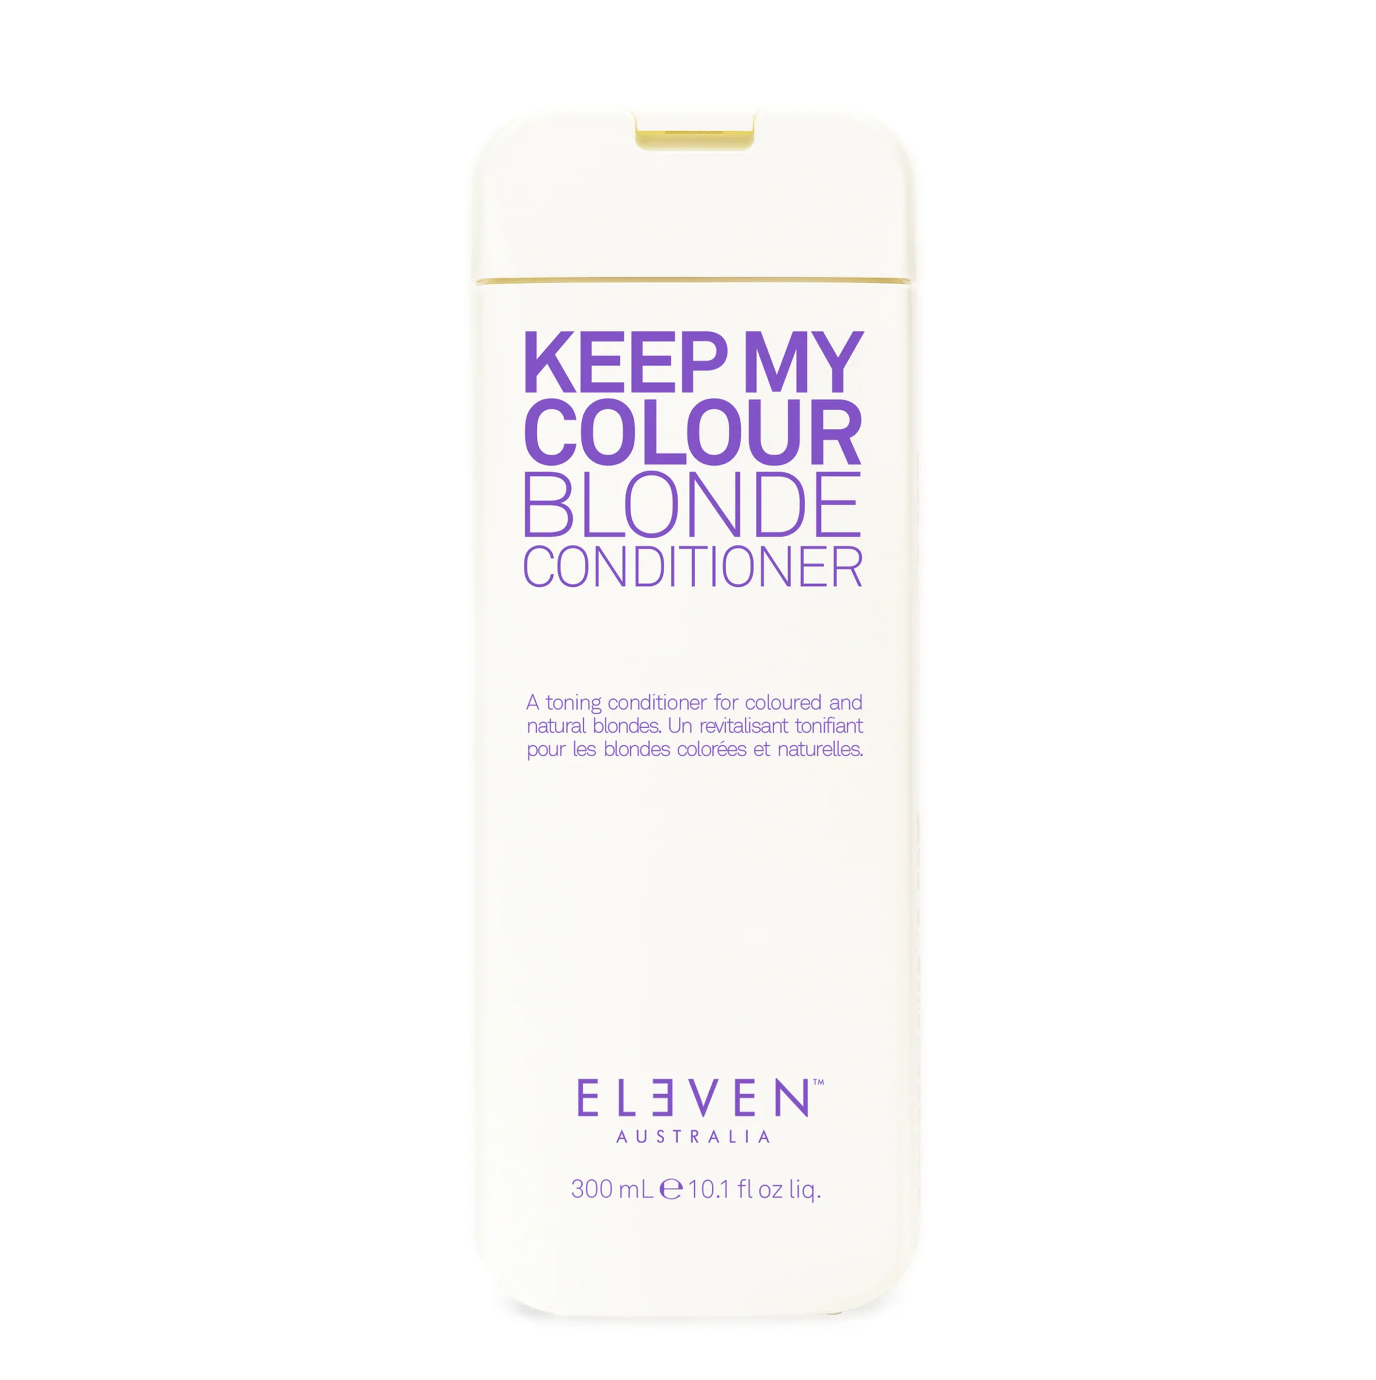 Keep My Colour Blonde Conditioner, 300 ml.